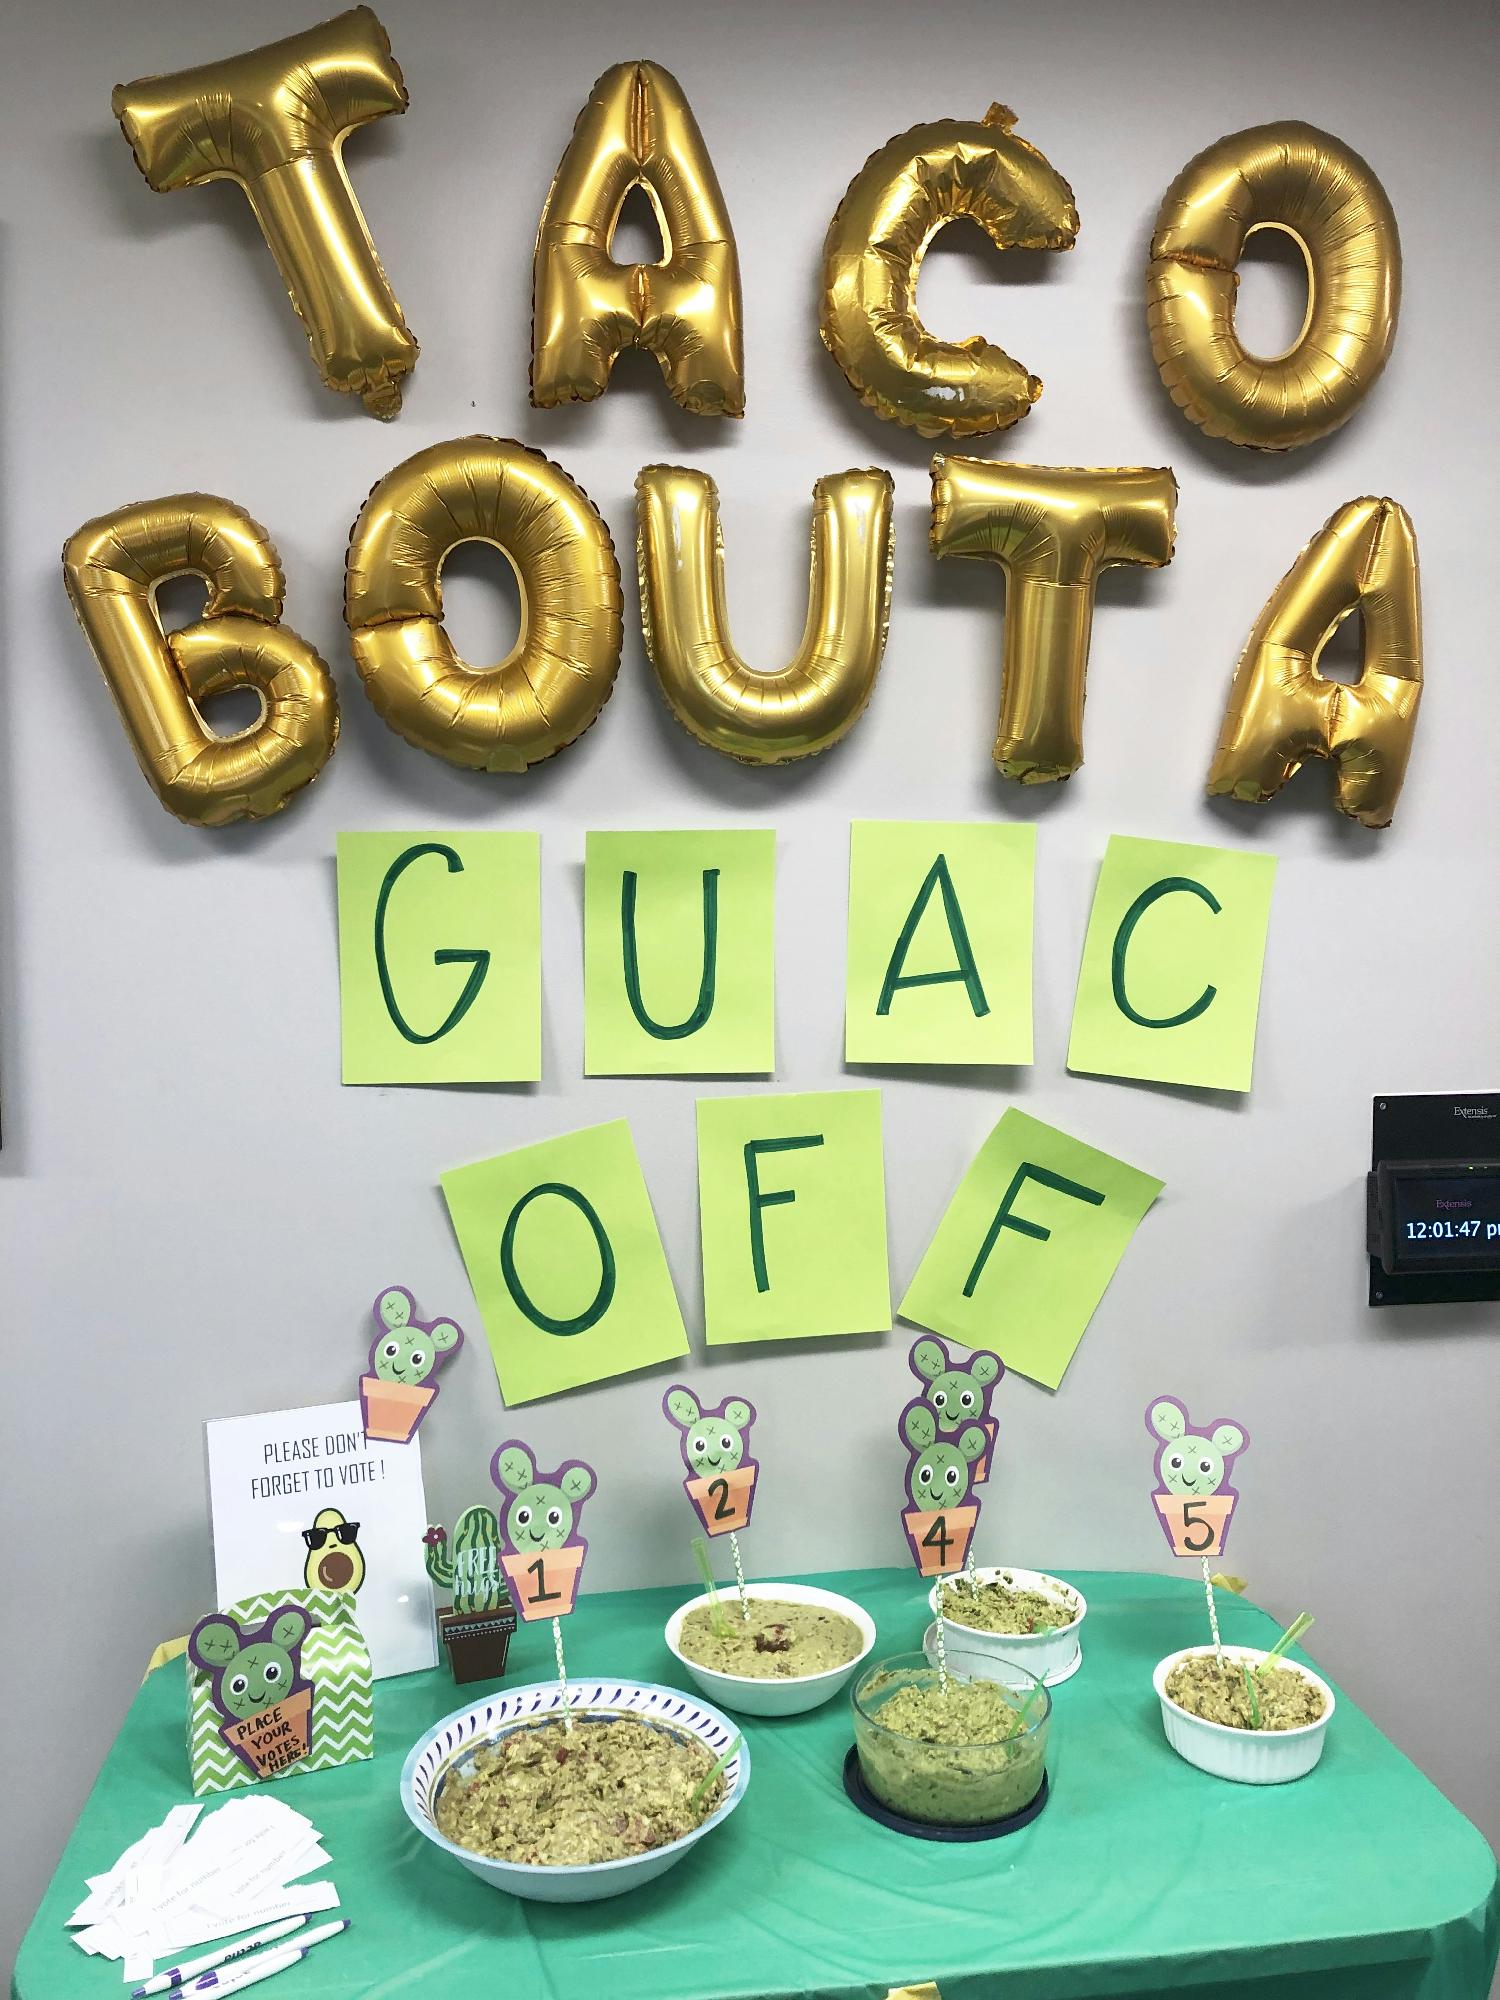 Extensis has a 'Guac-Off', employees made guacamole and we held an employee vote to choose the tastiest!